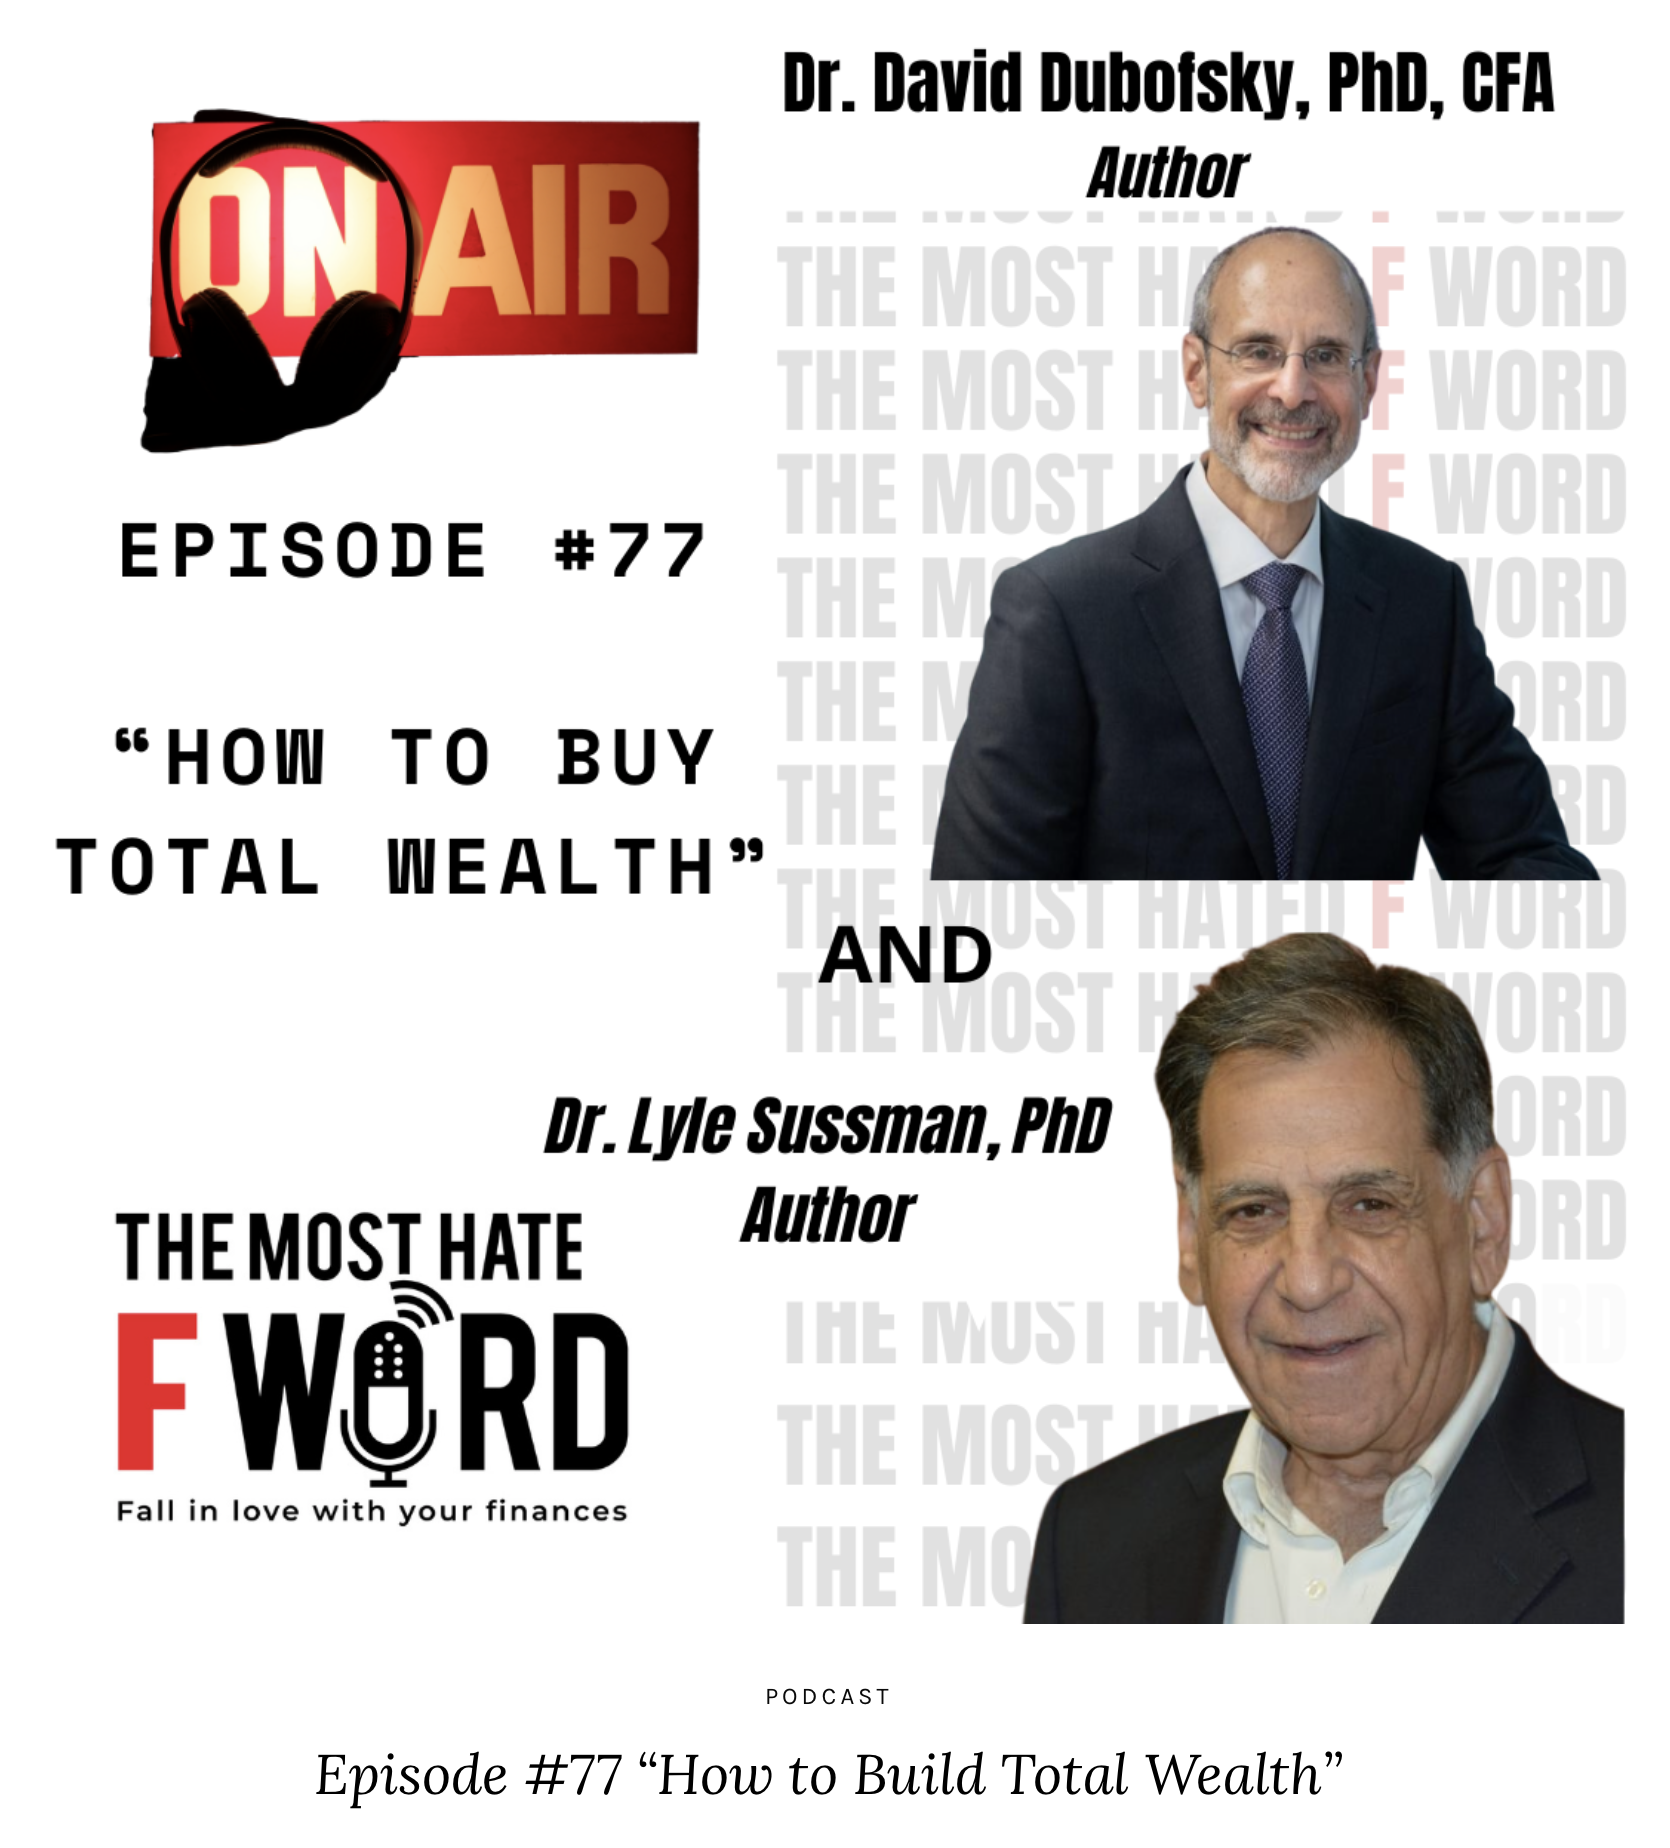 Episode #77 “How to Build Total Wealth”